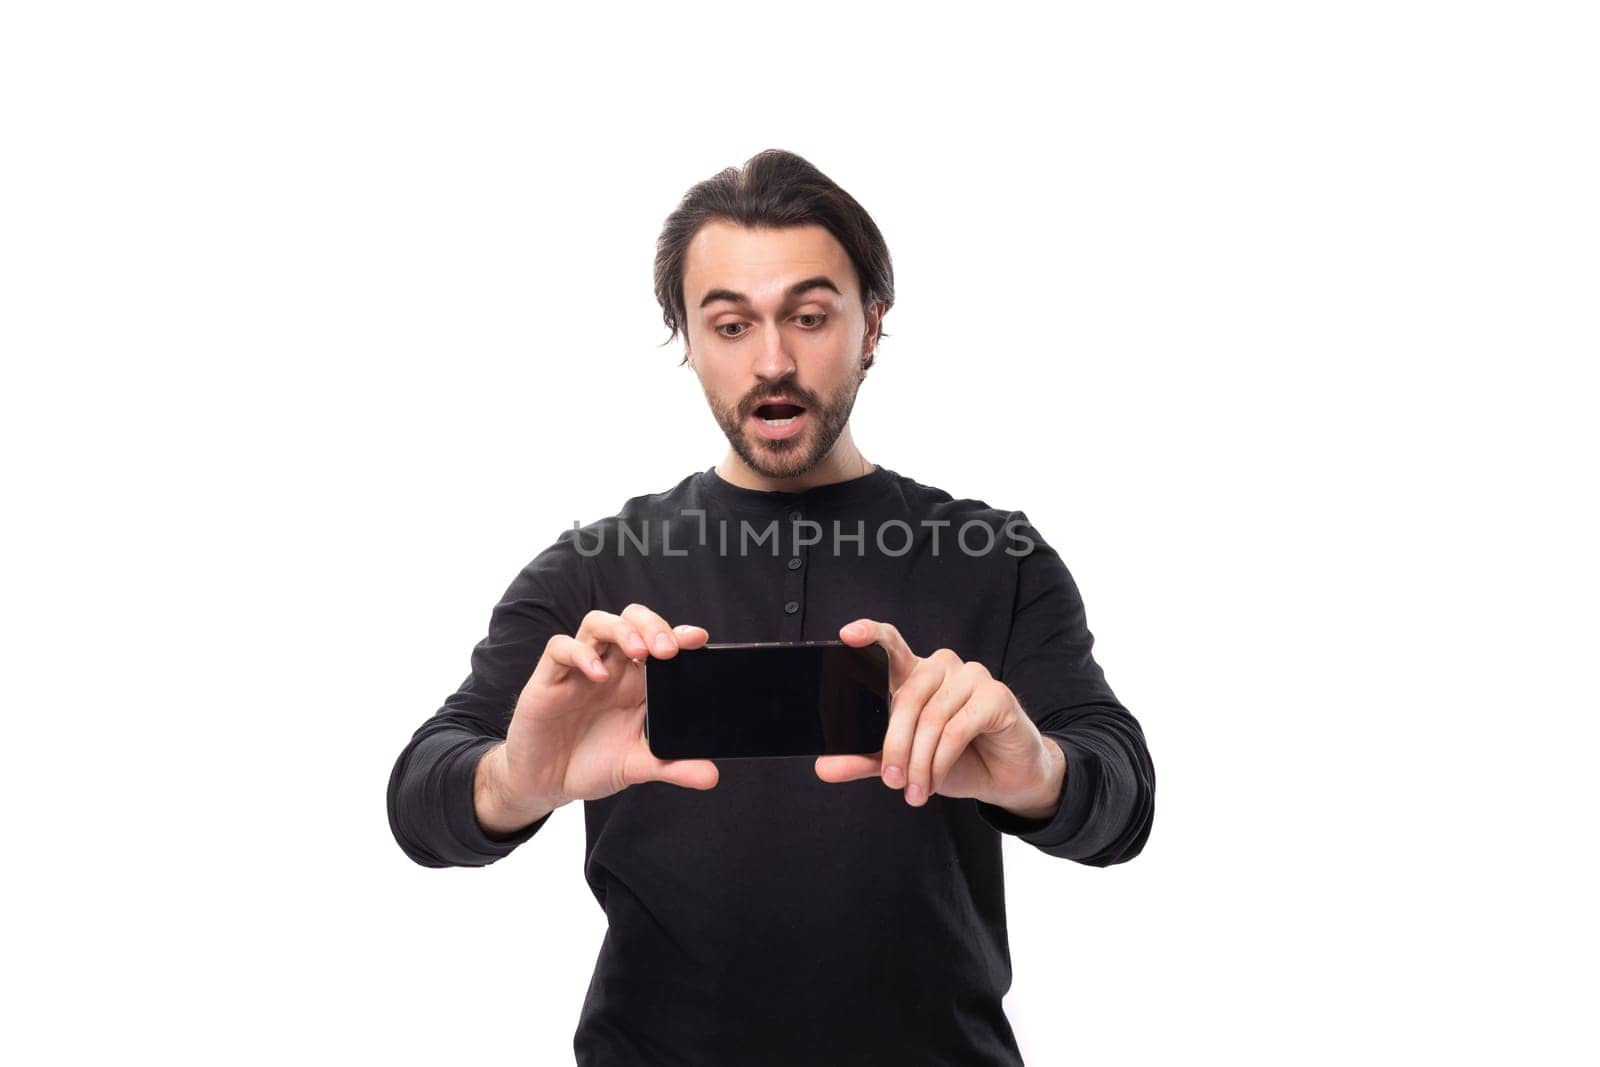 handsome european macho man with black hair and beard with an earring in his ear in surprise shows the screen of a smartphone horizontally standing on an isolated white background with copy space.